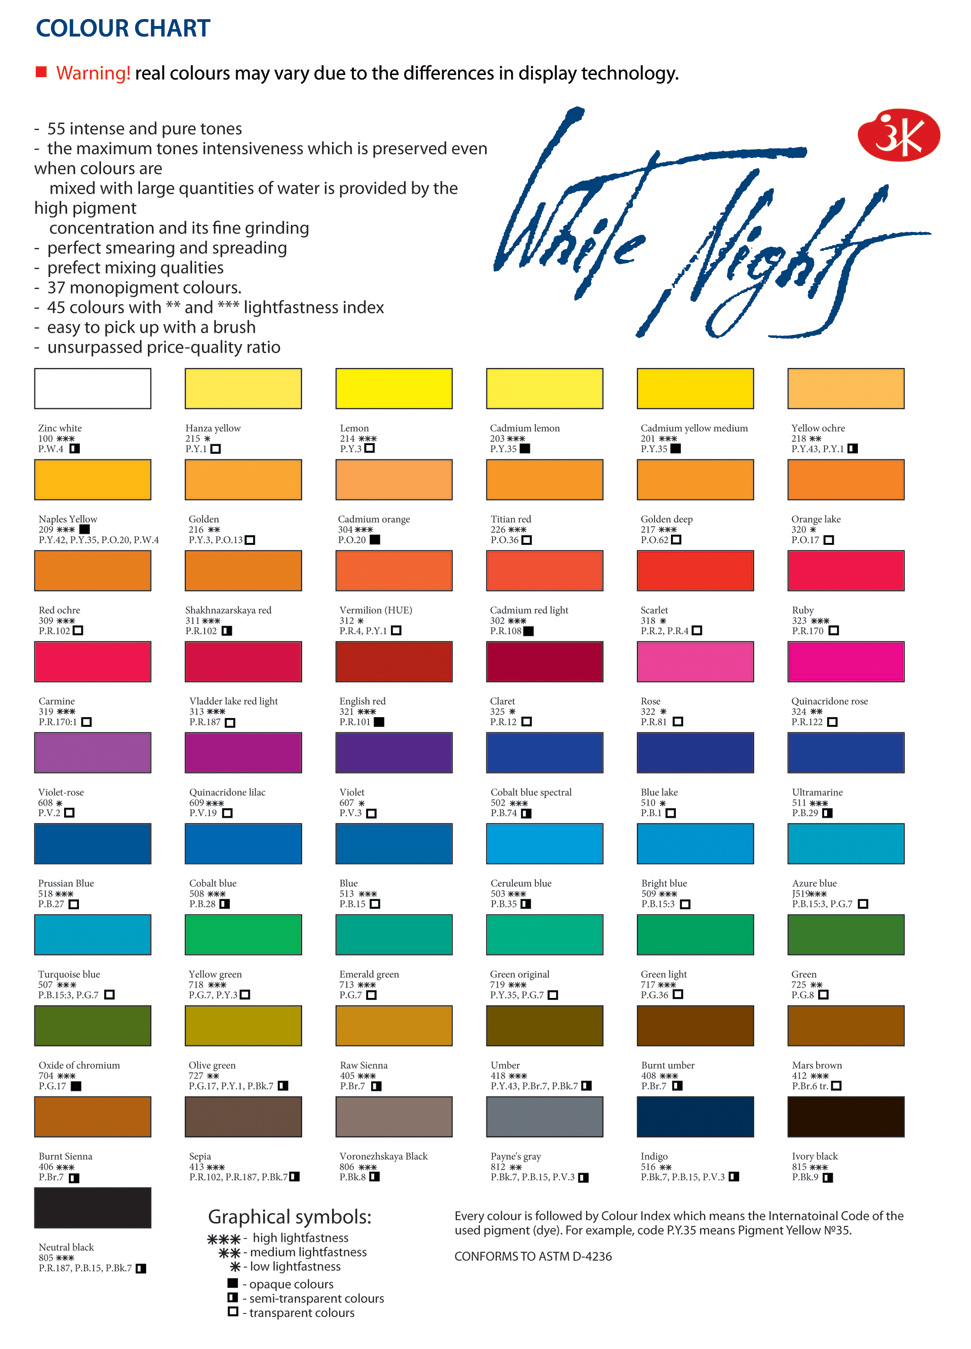 White nights watercolor paints 12 colors of plastic packaging